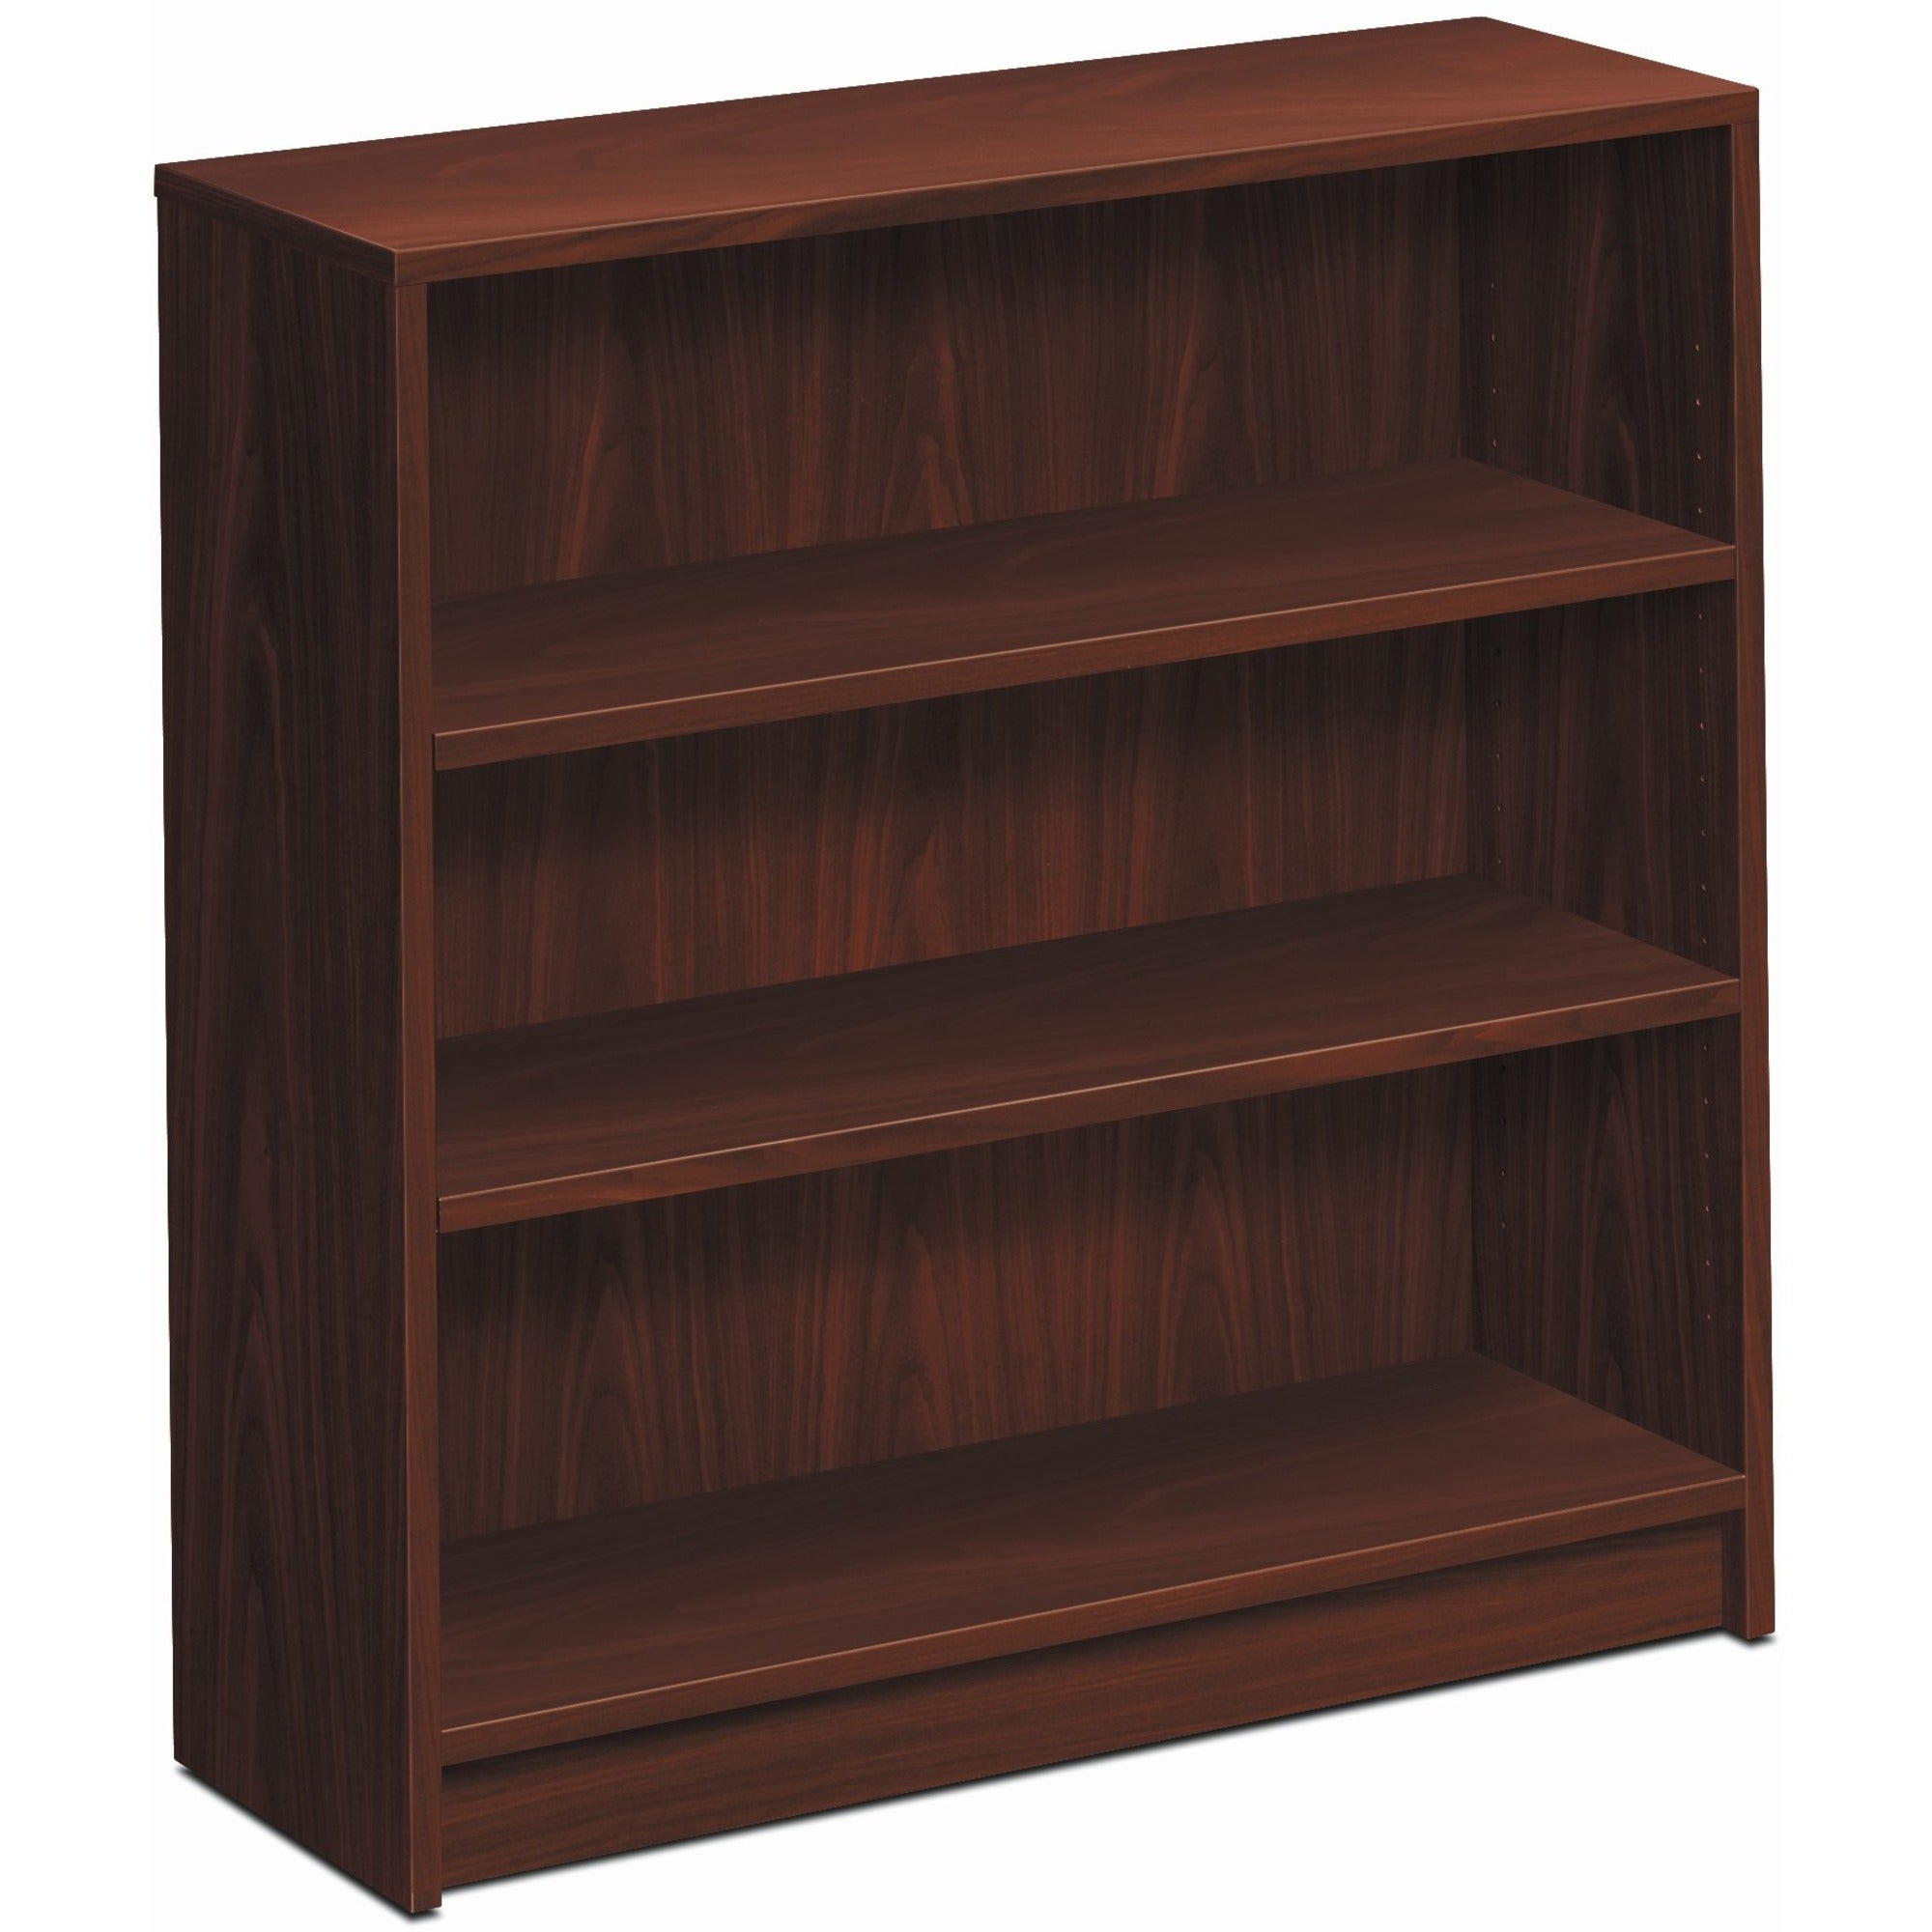 HON 1870 Series Bookcase | 3 Shelves | 36"W | Mahogany Finish - 3 Shelf(ves) - 36" Height x 36" Width x 11.5" Depth - Abrasion Resistant, Leveling Glide, Sturdy, Scratch Resistant, Spill Resistant, Stain Resistant - 42% Recycled - Laminate - Mahogany - 